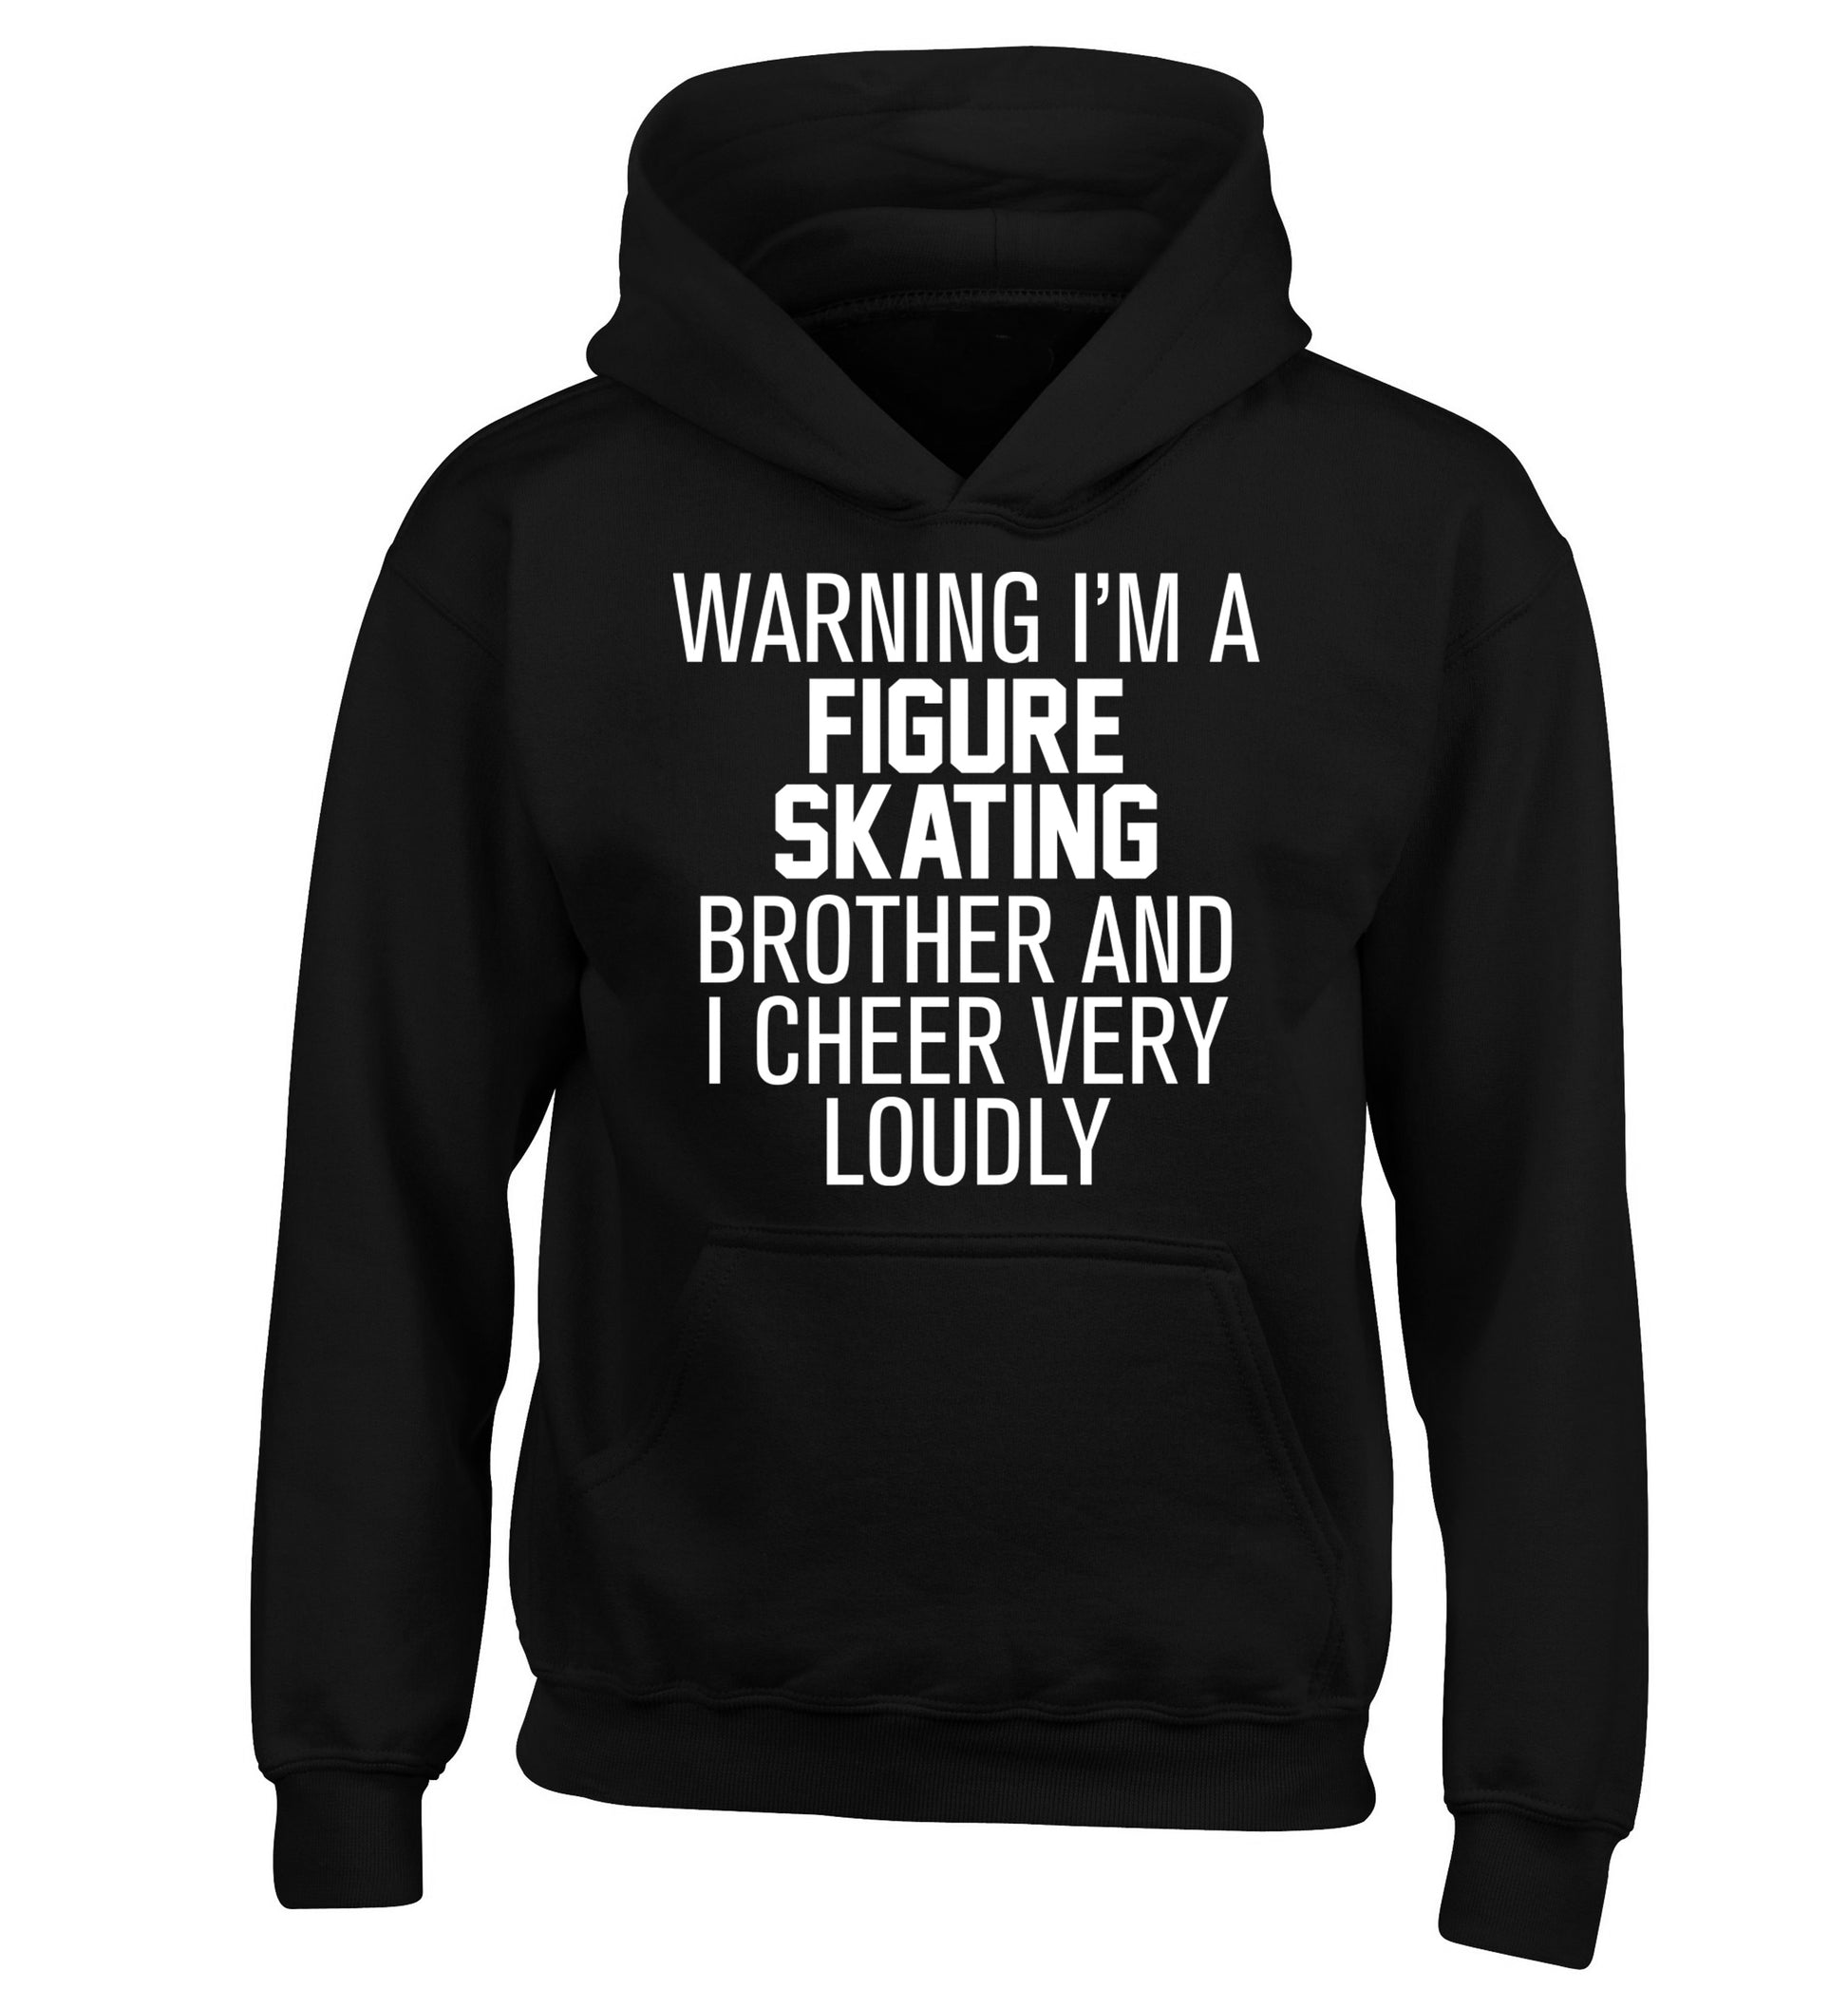 Warning I'm a figure skating brother and I cheer very loudly children's black hoodie 12-14 Years